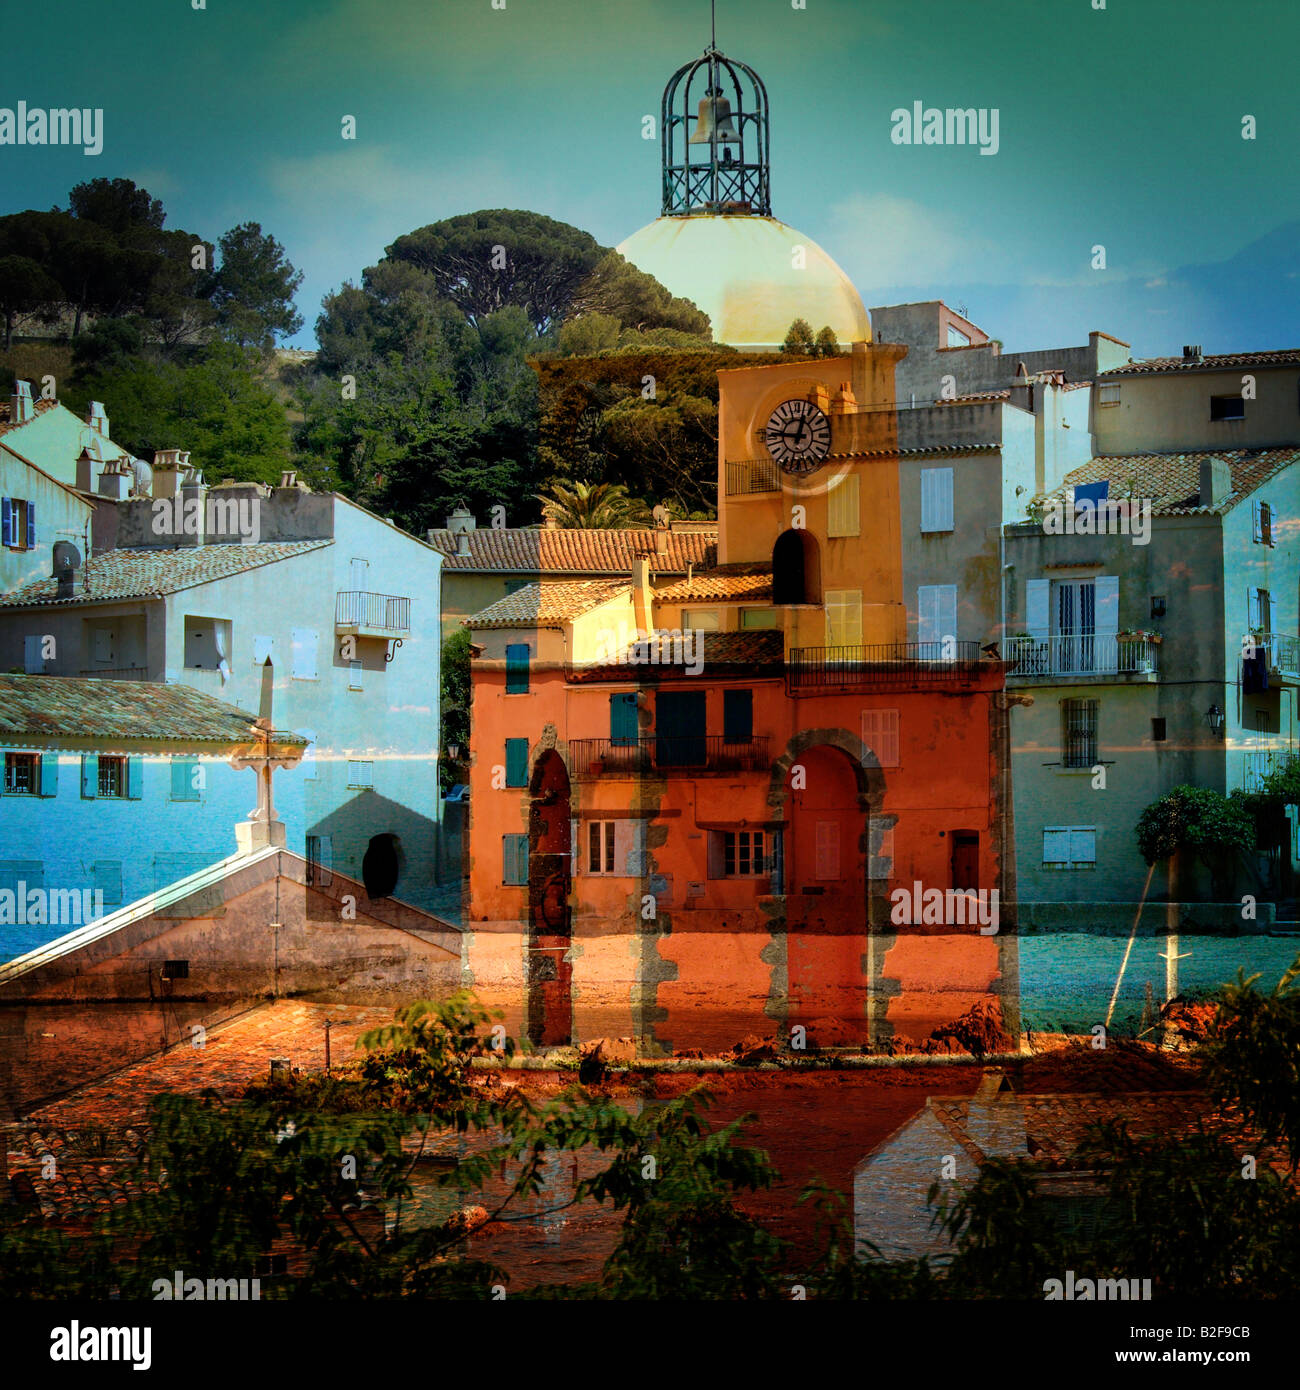 St Tropez or Saint Tropez Montage FOR EDITORIAL USE ONLY Stock Photo